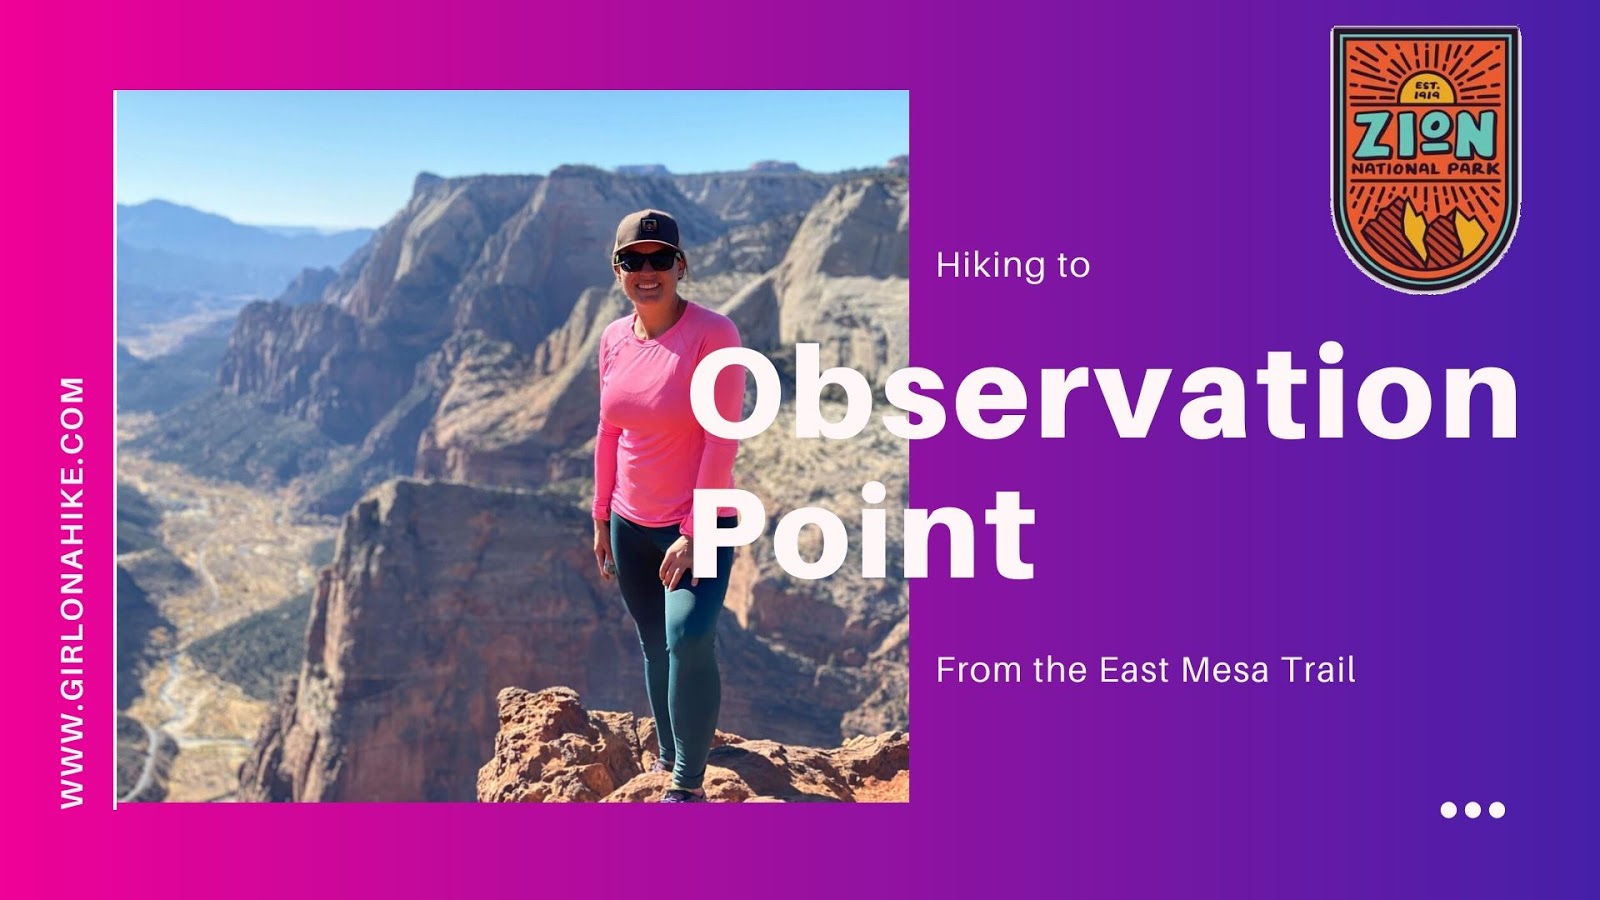 Hiking to Observation Point via East Mesa Trail, Zion National Park